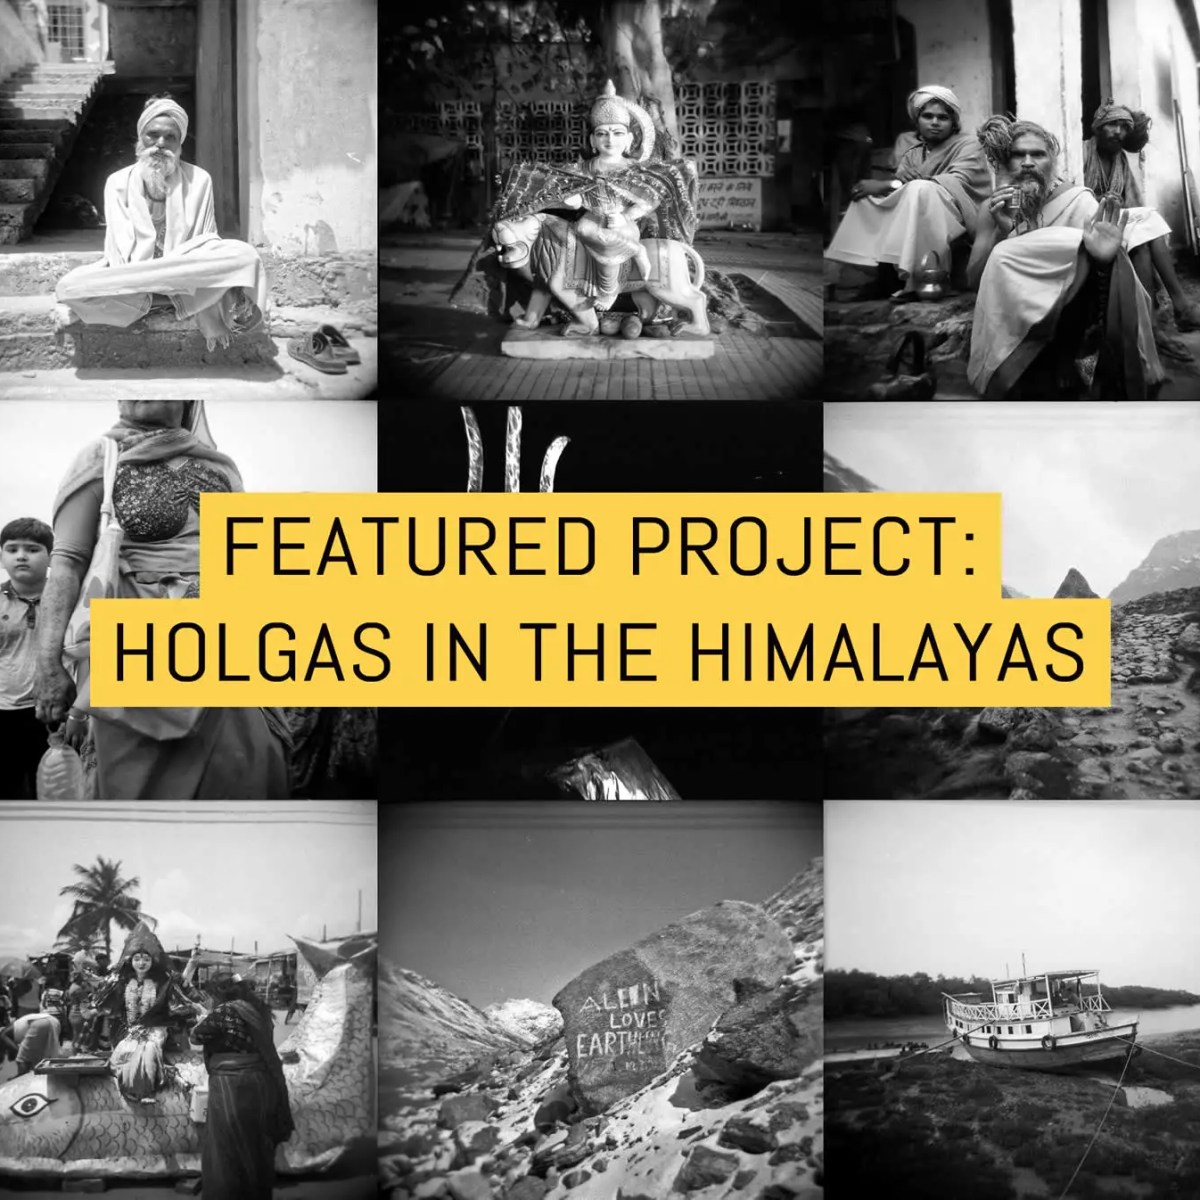 Cover - Featured project - Sacred Hydrology aka Holgas in the Himalayas - by Andrew Tonn